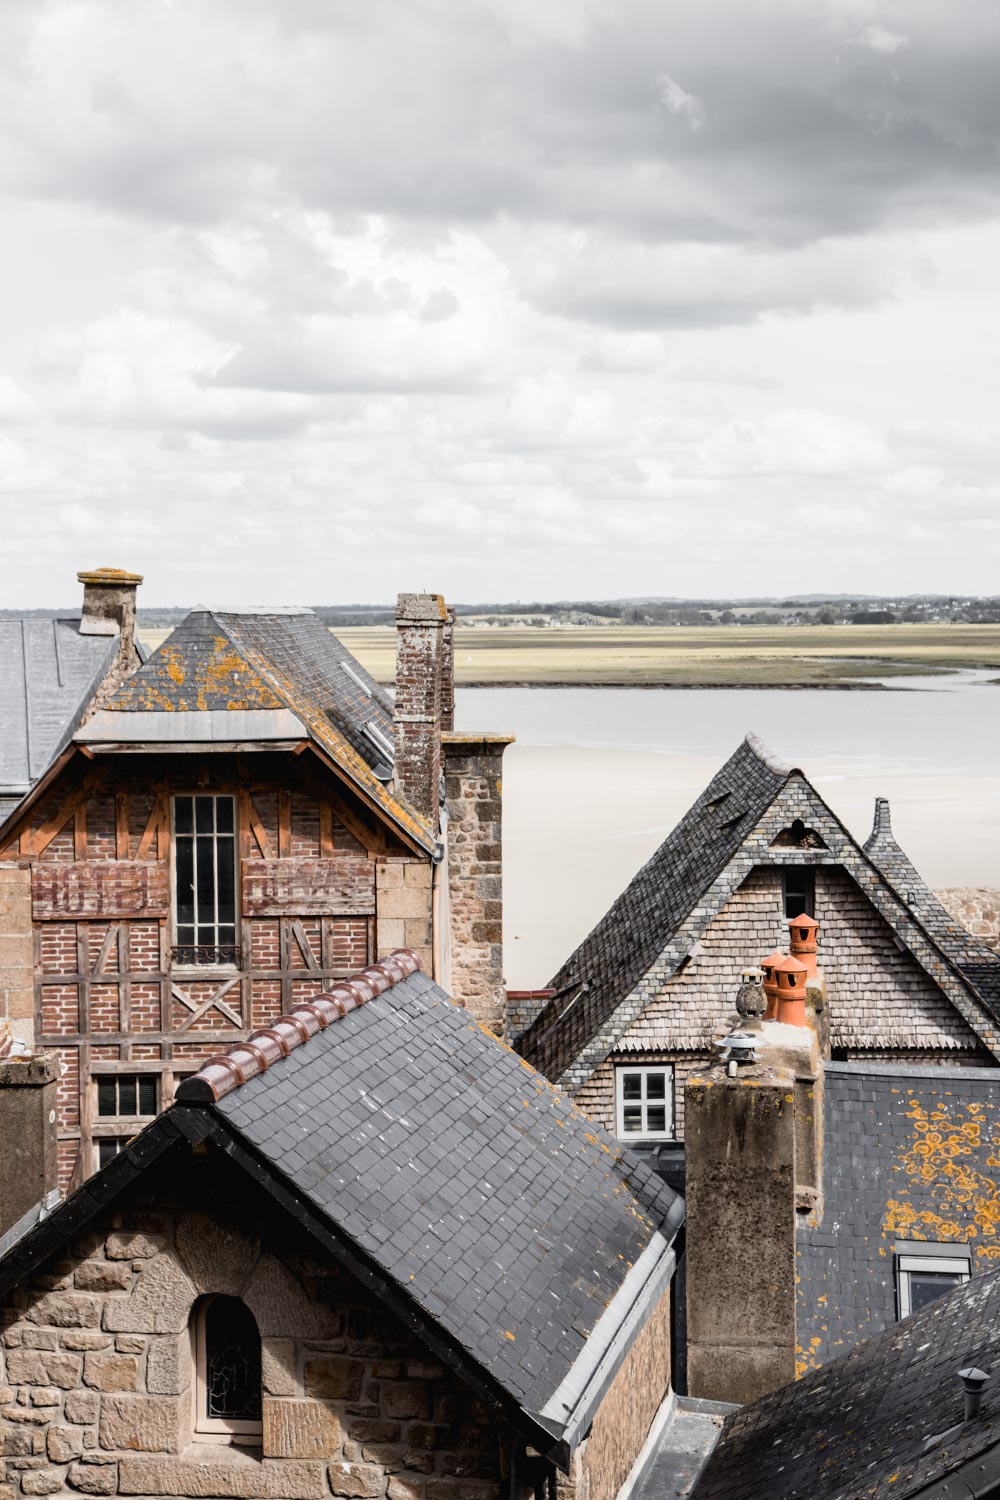 views from the village of Mont-Saint-Michel, France